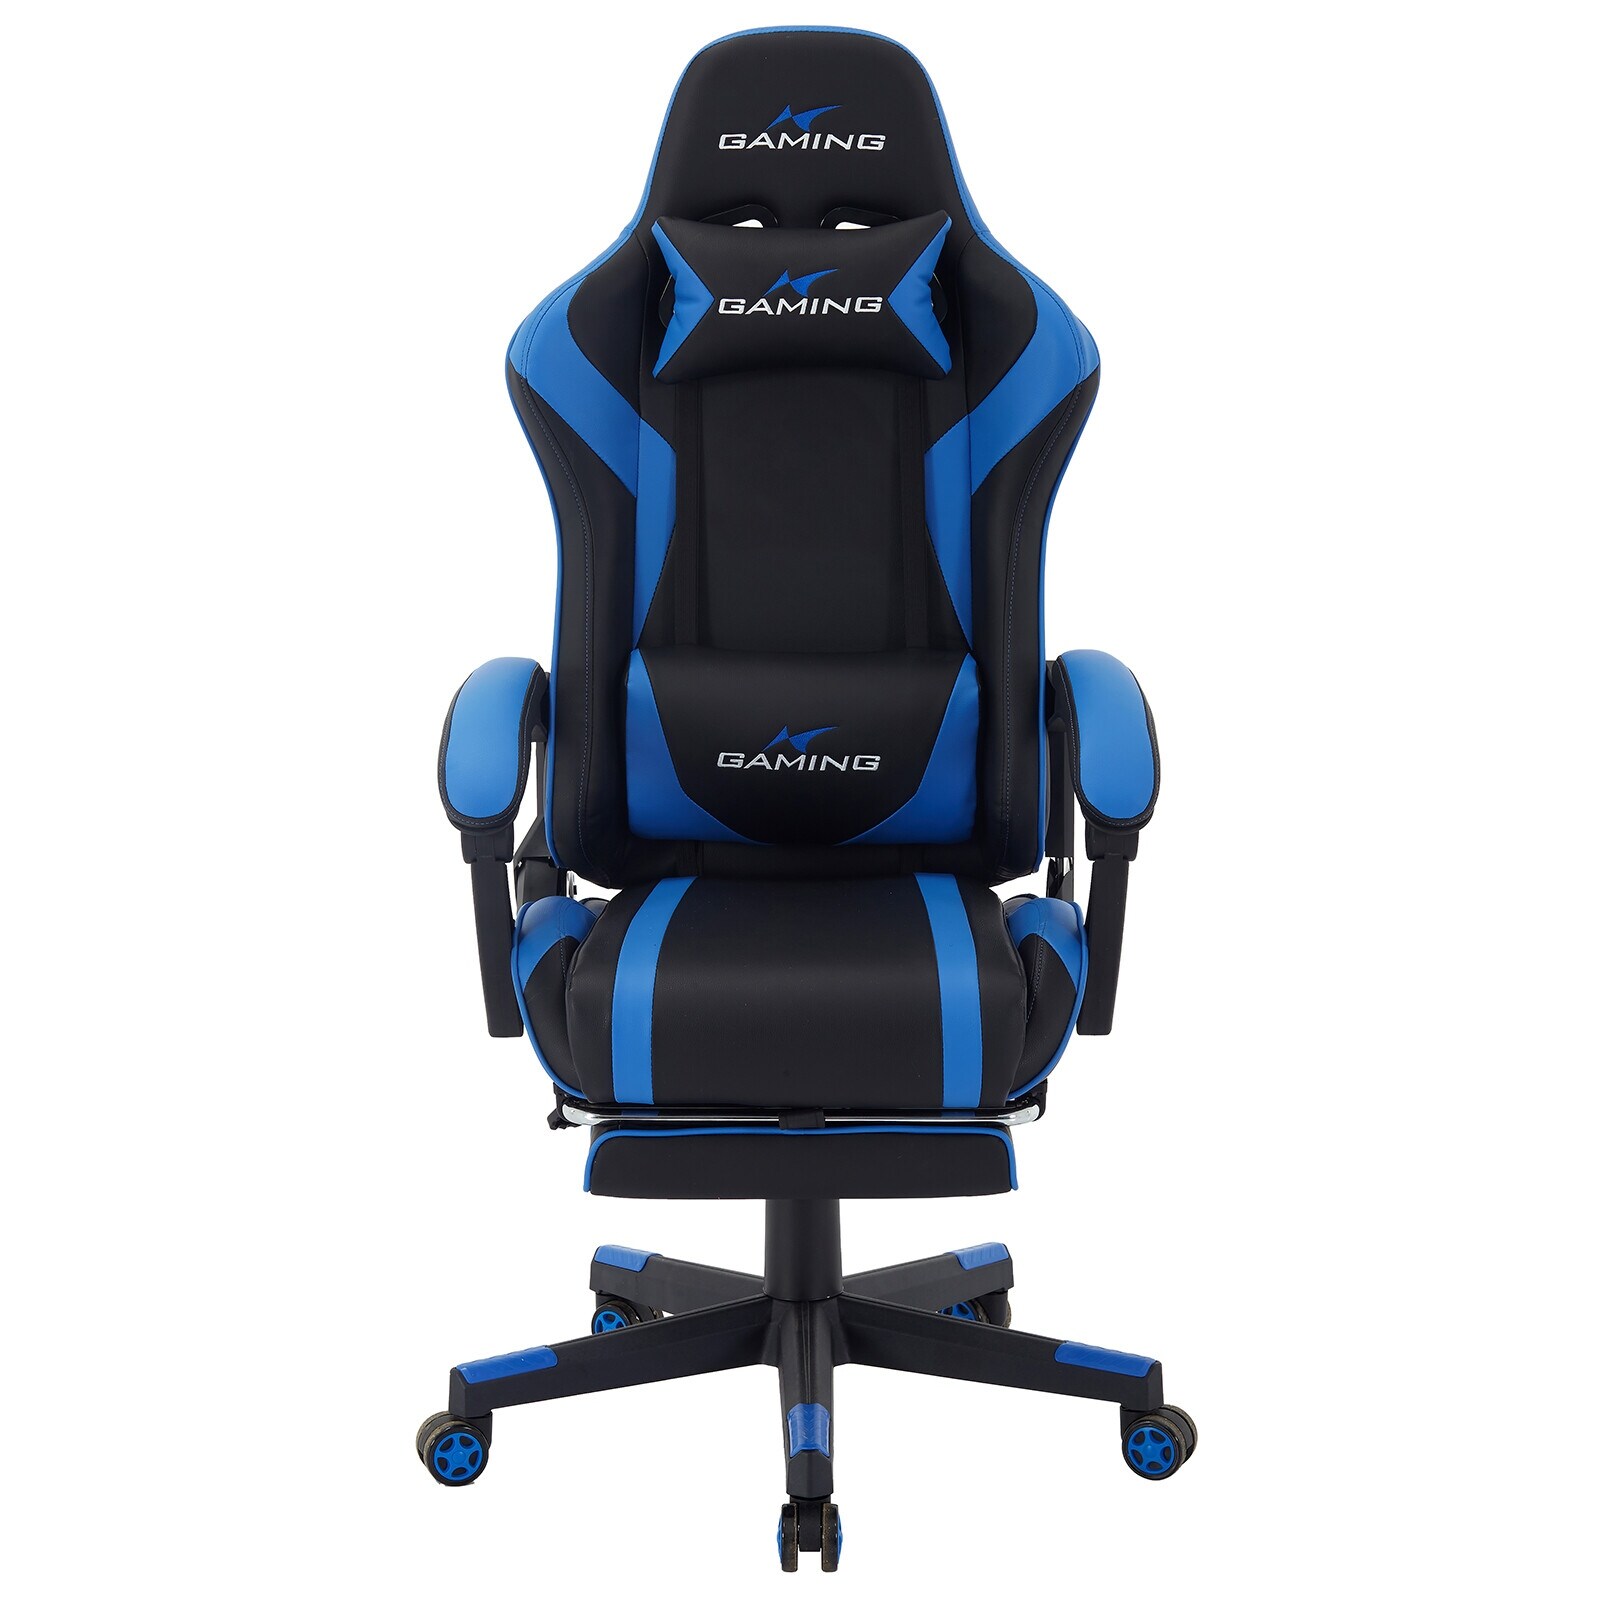 https://ak1.ostkcdn.com/images/products/is/images/direct/031e5932eafeac549e84023bb78f15c04d27cd19/Commodore-Gaming-Chair-Ergonomic-Adjustable-Height-Swivel-Recliner-with-Adjustable-Armrest-and-Retractable-Footrest.jpg